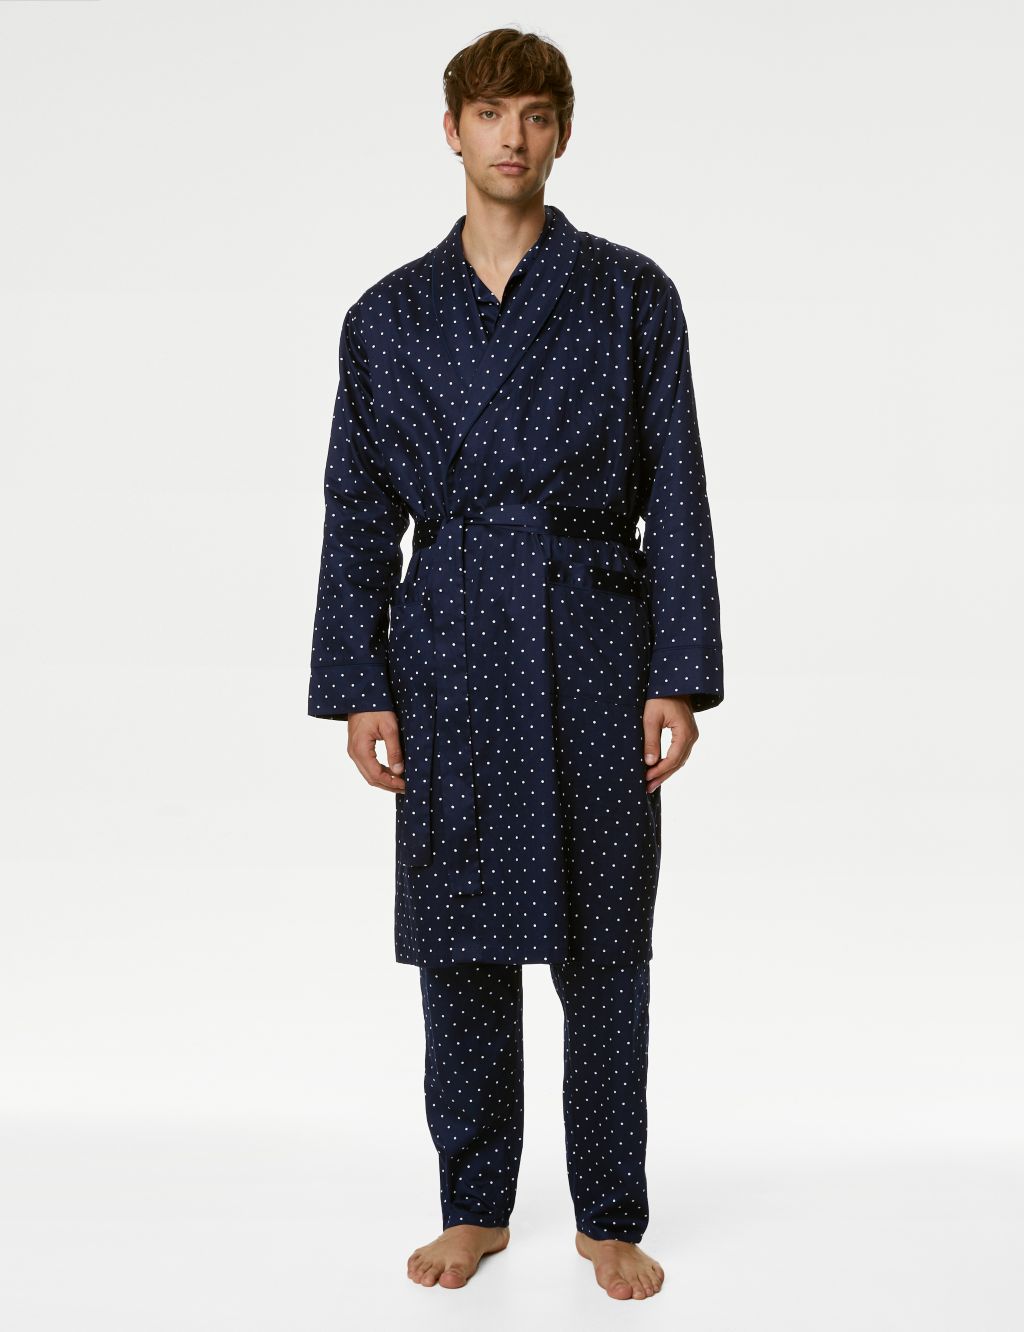 Pure Cotton Polka Dot Dressing Gown image 4